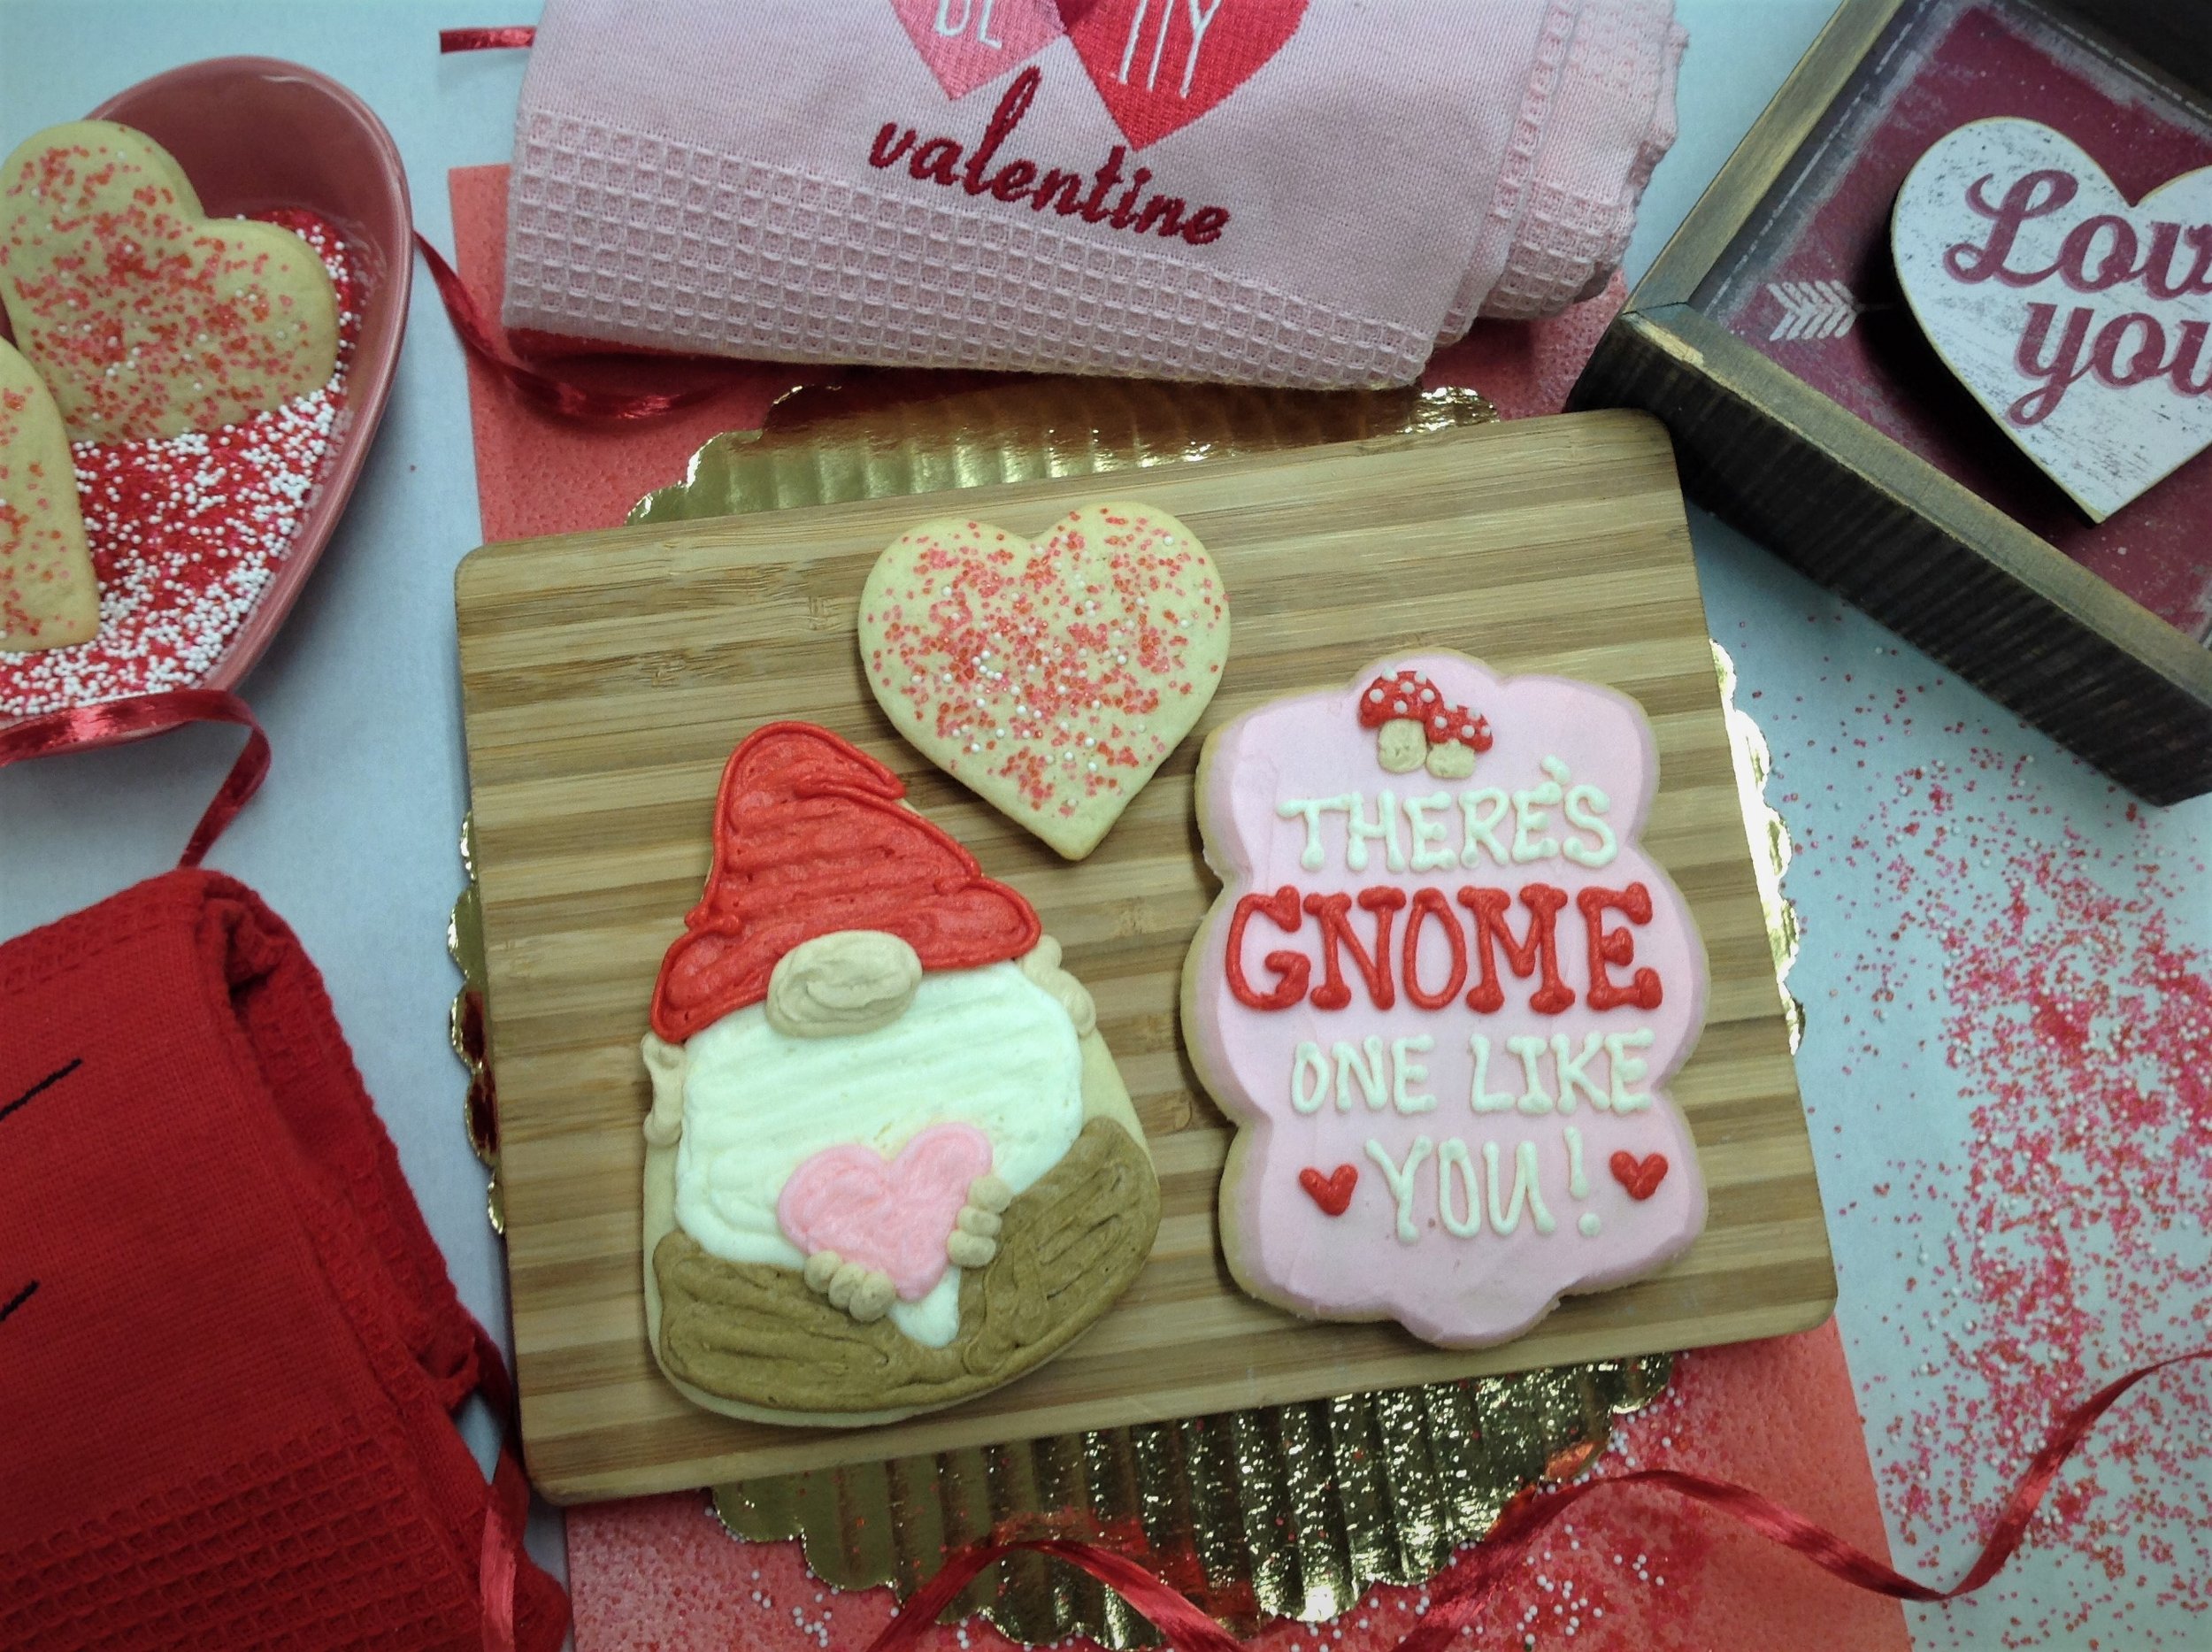 There_s GNOME one like you Valentine Set.JPG